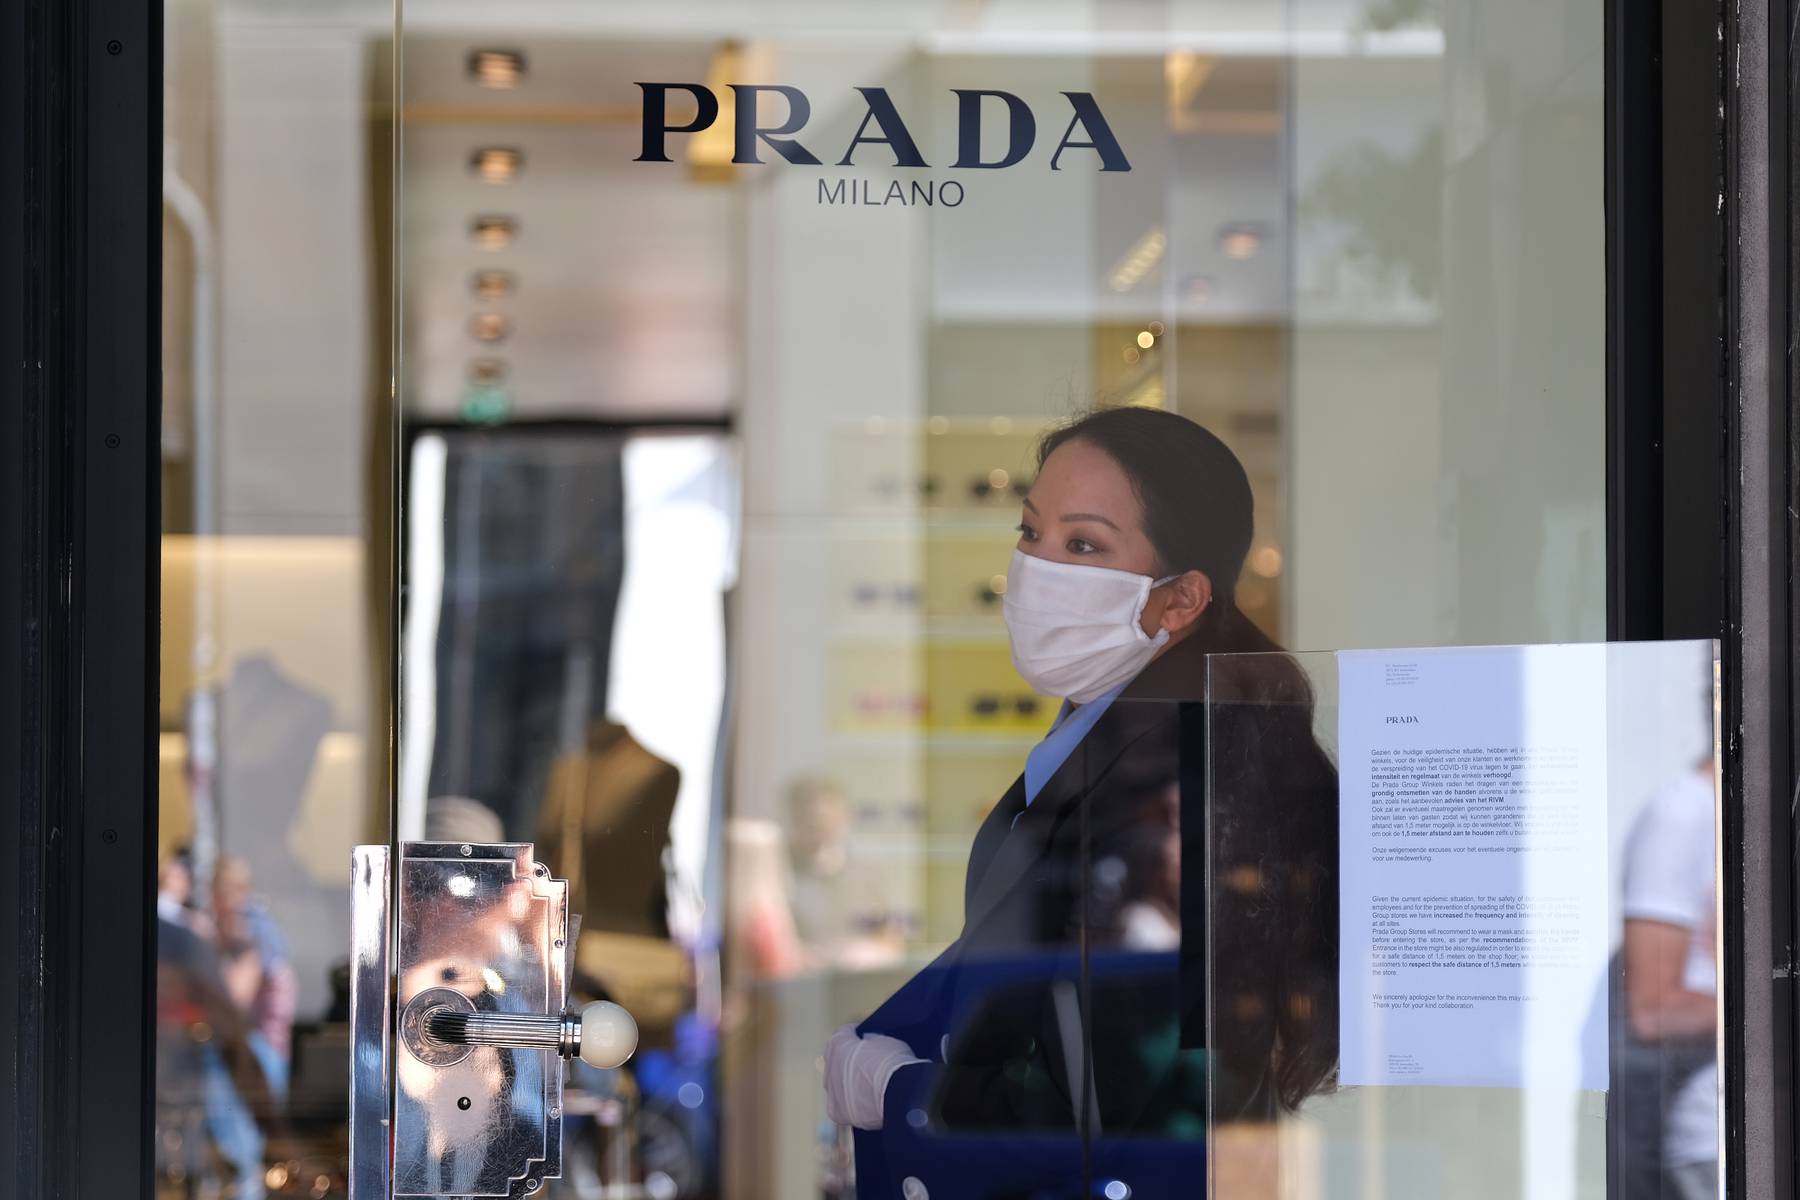 A staff member of Prada, wearing a mask and protective plastic gloves, stands behind a glass door with an advisory on how to shop amid coronavirus